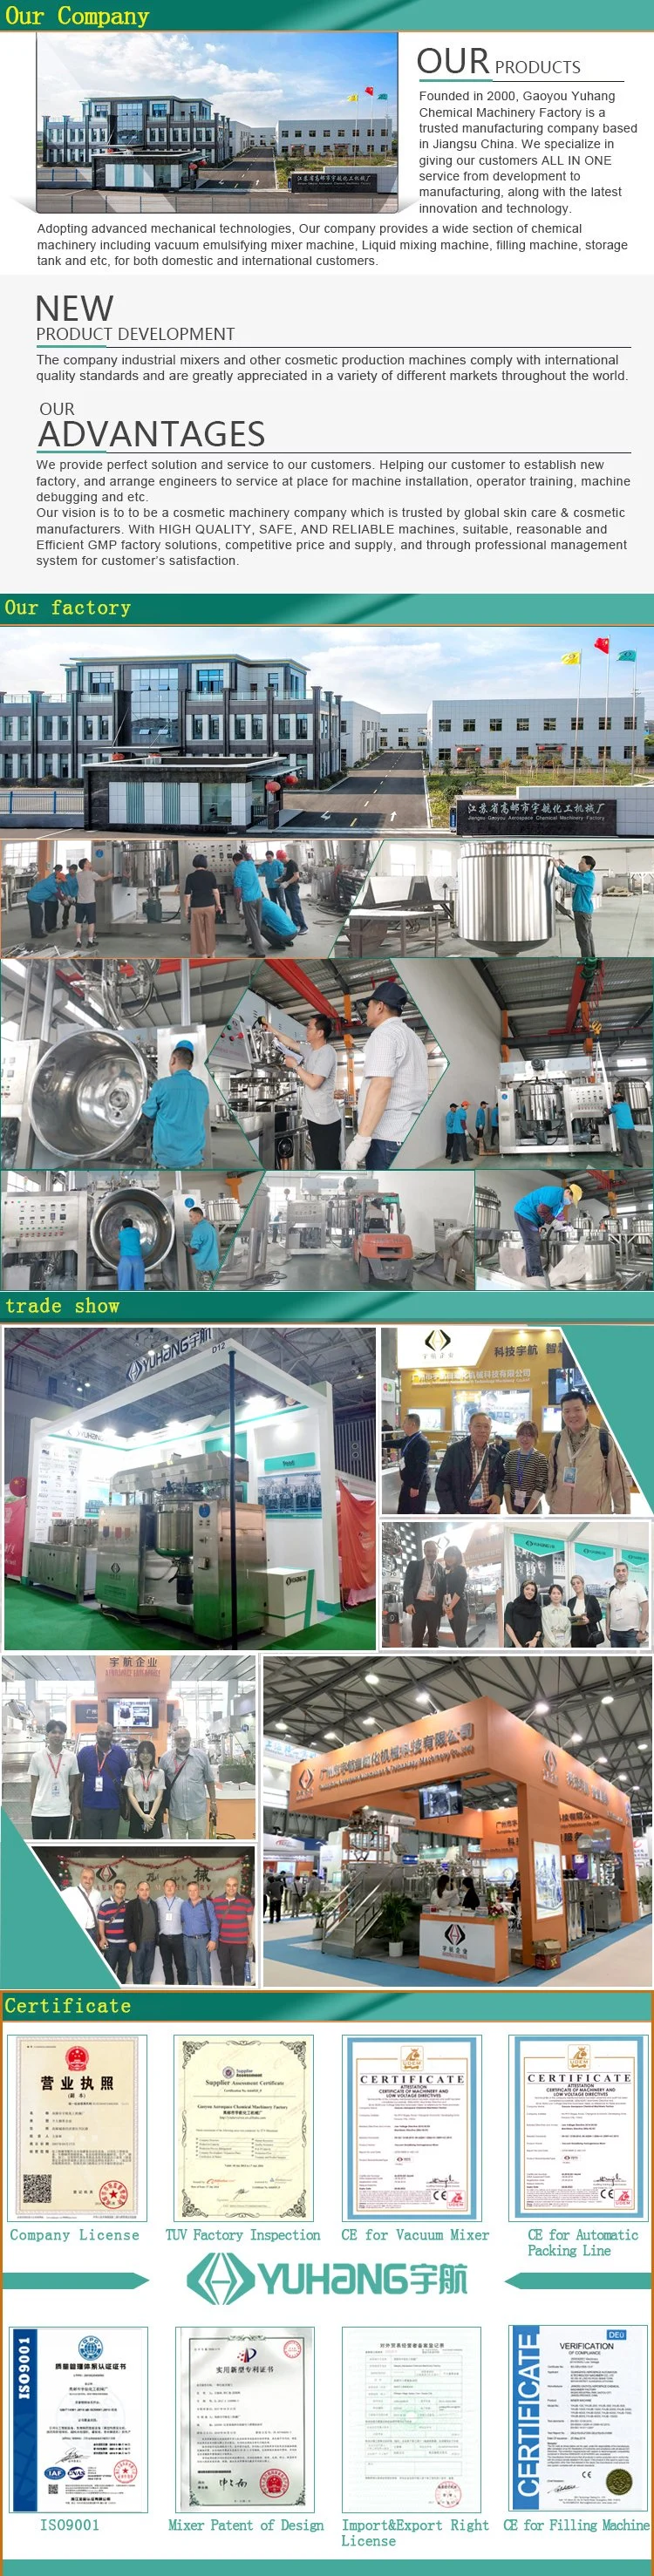 Automatic Plastic/Glass Bottle Filling and Capping Machine Pictures & Photosautomatic Plastic/Glass Bottle Filling and Capping Machine Pictures & Photosautom